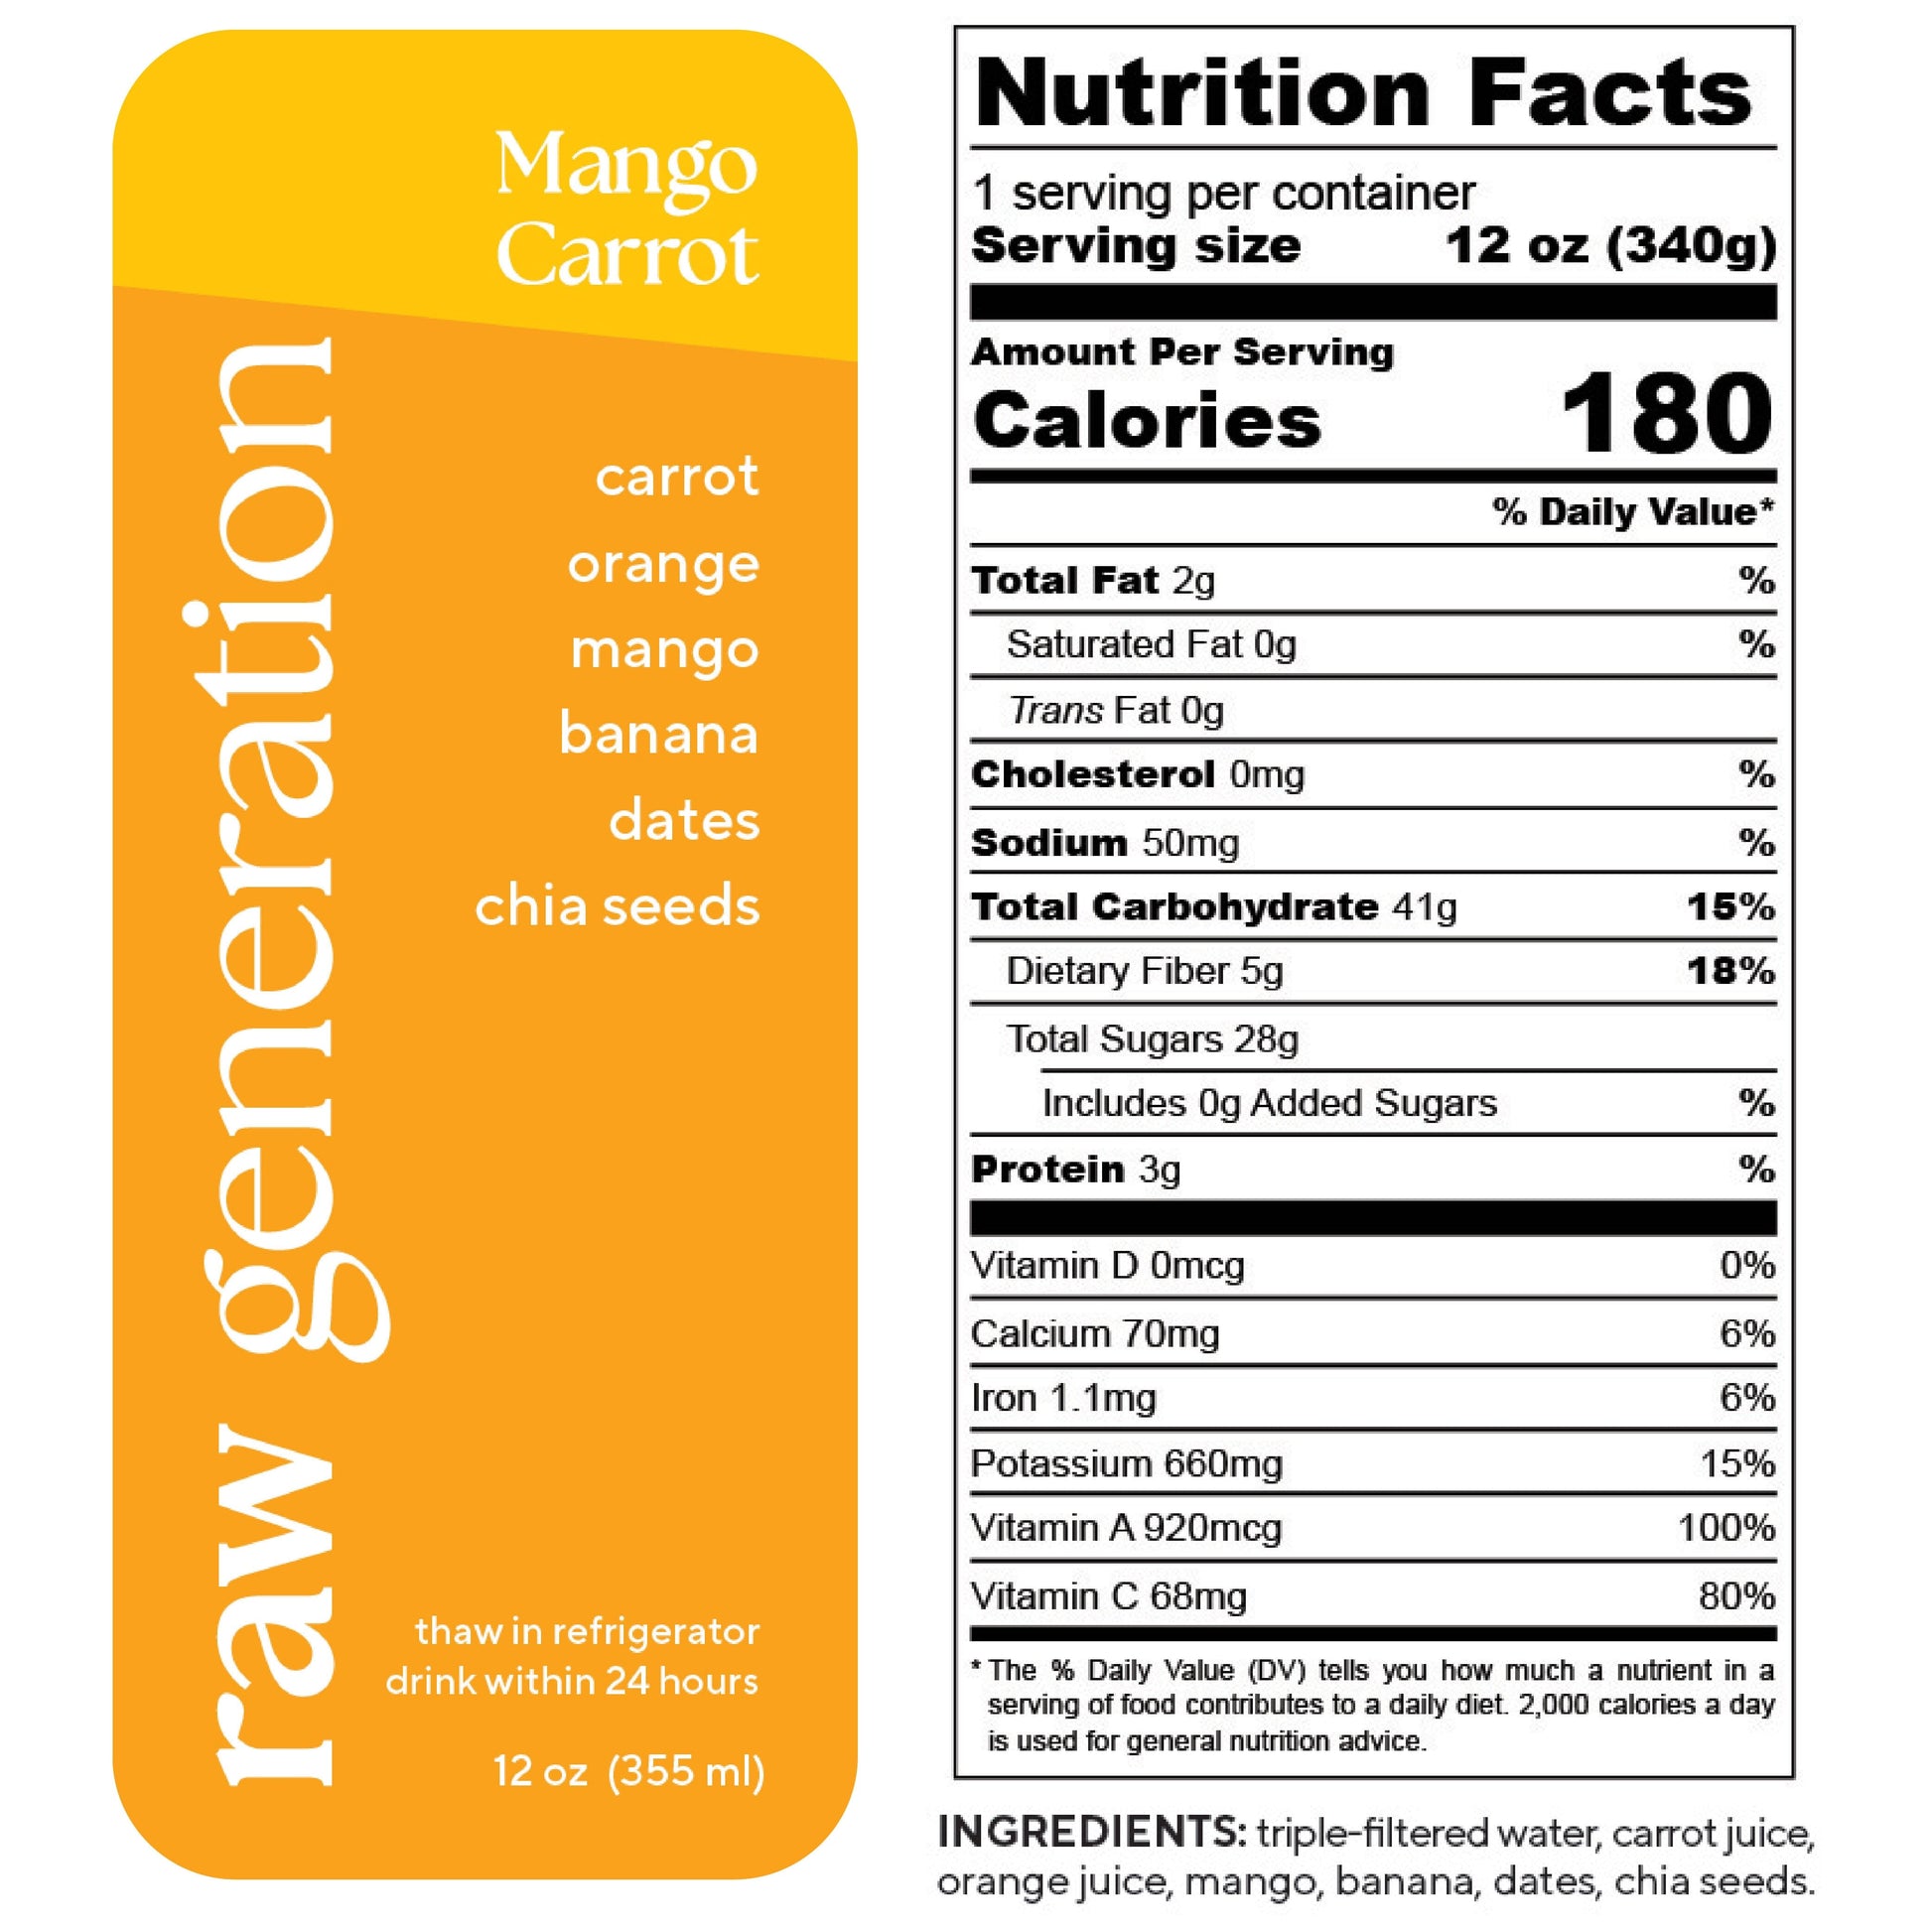 Nutrition Facts, 1 serving/container, 12 oz (340g), Calories 180, Total Fat 2g, Saturated Fat 0g, Trans Fat 0g, Cholesterol 0mg, Sodium 50mg, Total Carbohydrate 41g, Dietary Fiber 5g, Total Sugars 28g, Added Sugars 0g, Protein 3g, Vitamin D 0mcg, Calcium 70mg, Iron 1.1mg, Potassium 660mg, Vitamin A 920mcg, Vitamin C 68mg; Ingredients: triple-filtered water, carrot juice, orange juice, mango, banana, dates, chia seeds.